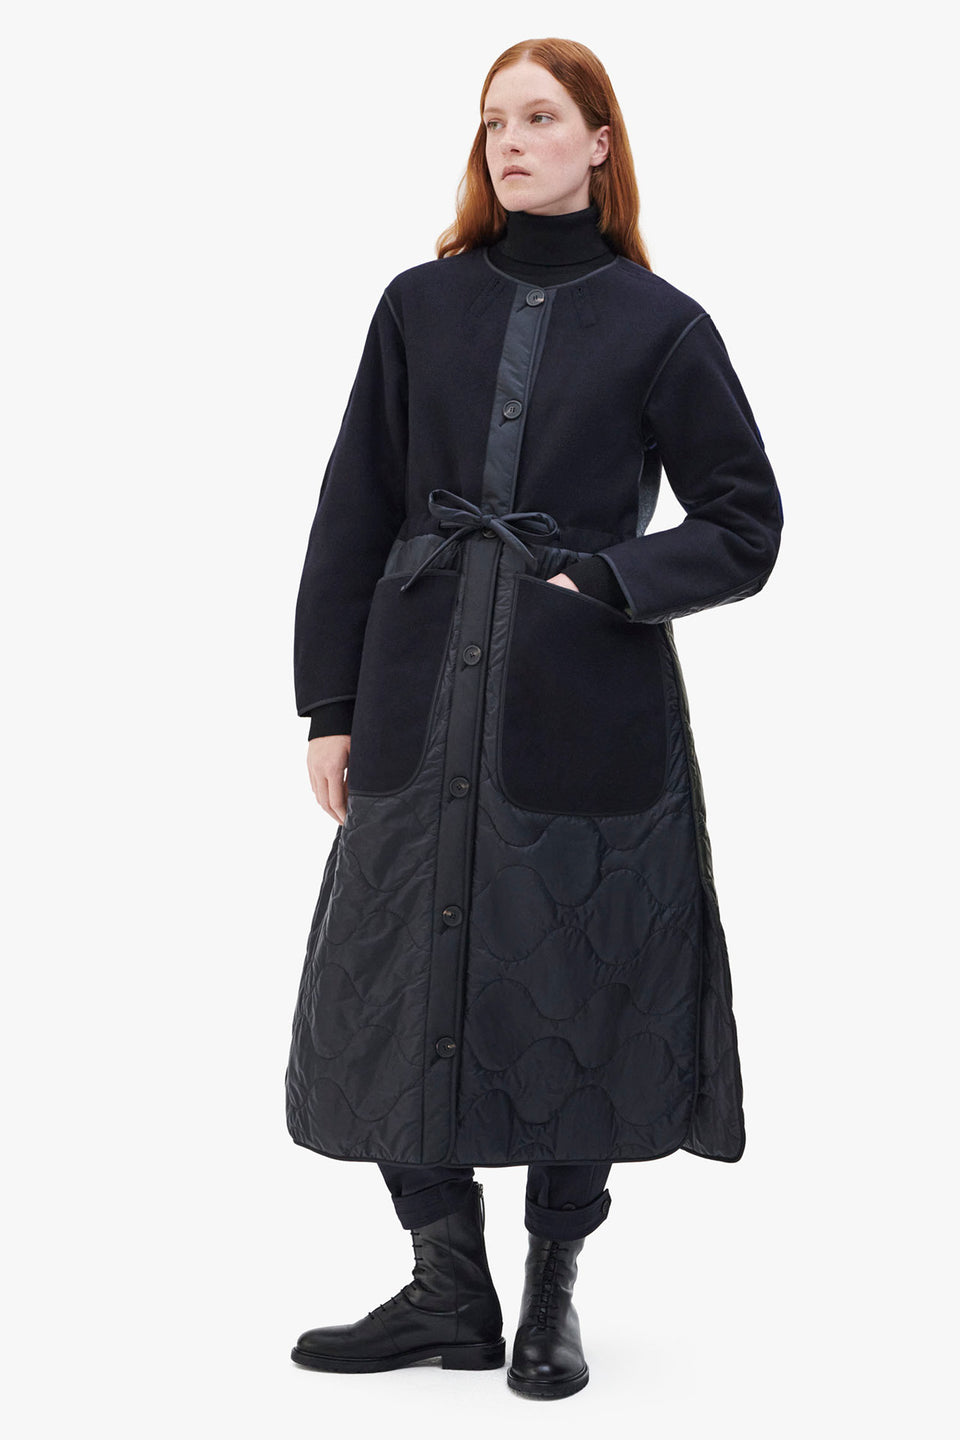 Long Wool Patchwork Quilt Jacket - Navy / Dark Olive (listing page thumbnail)